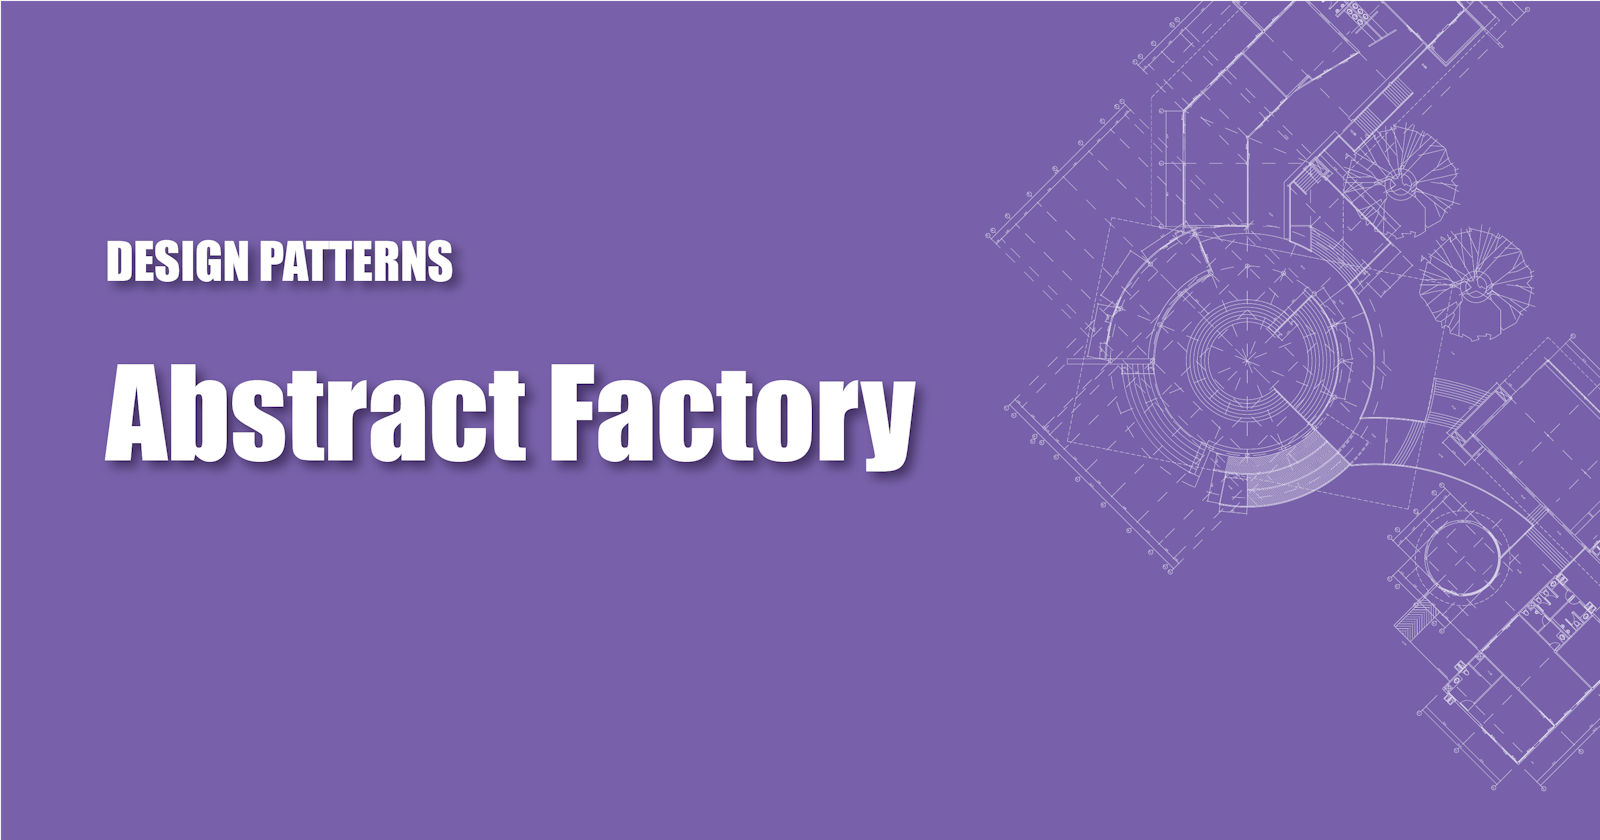 Abstract Factory pattern